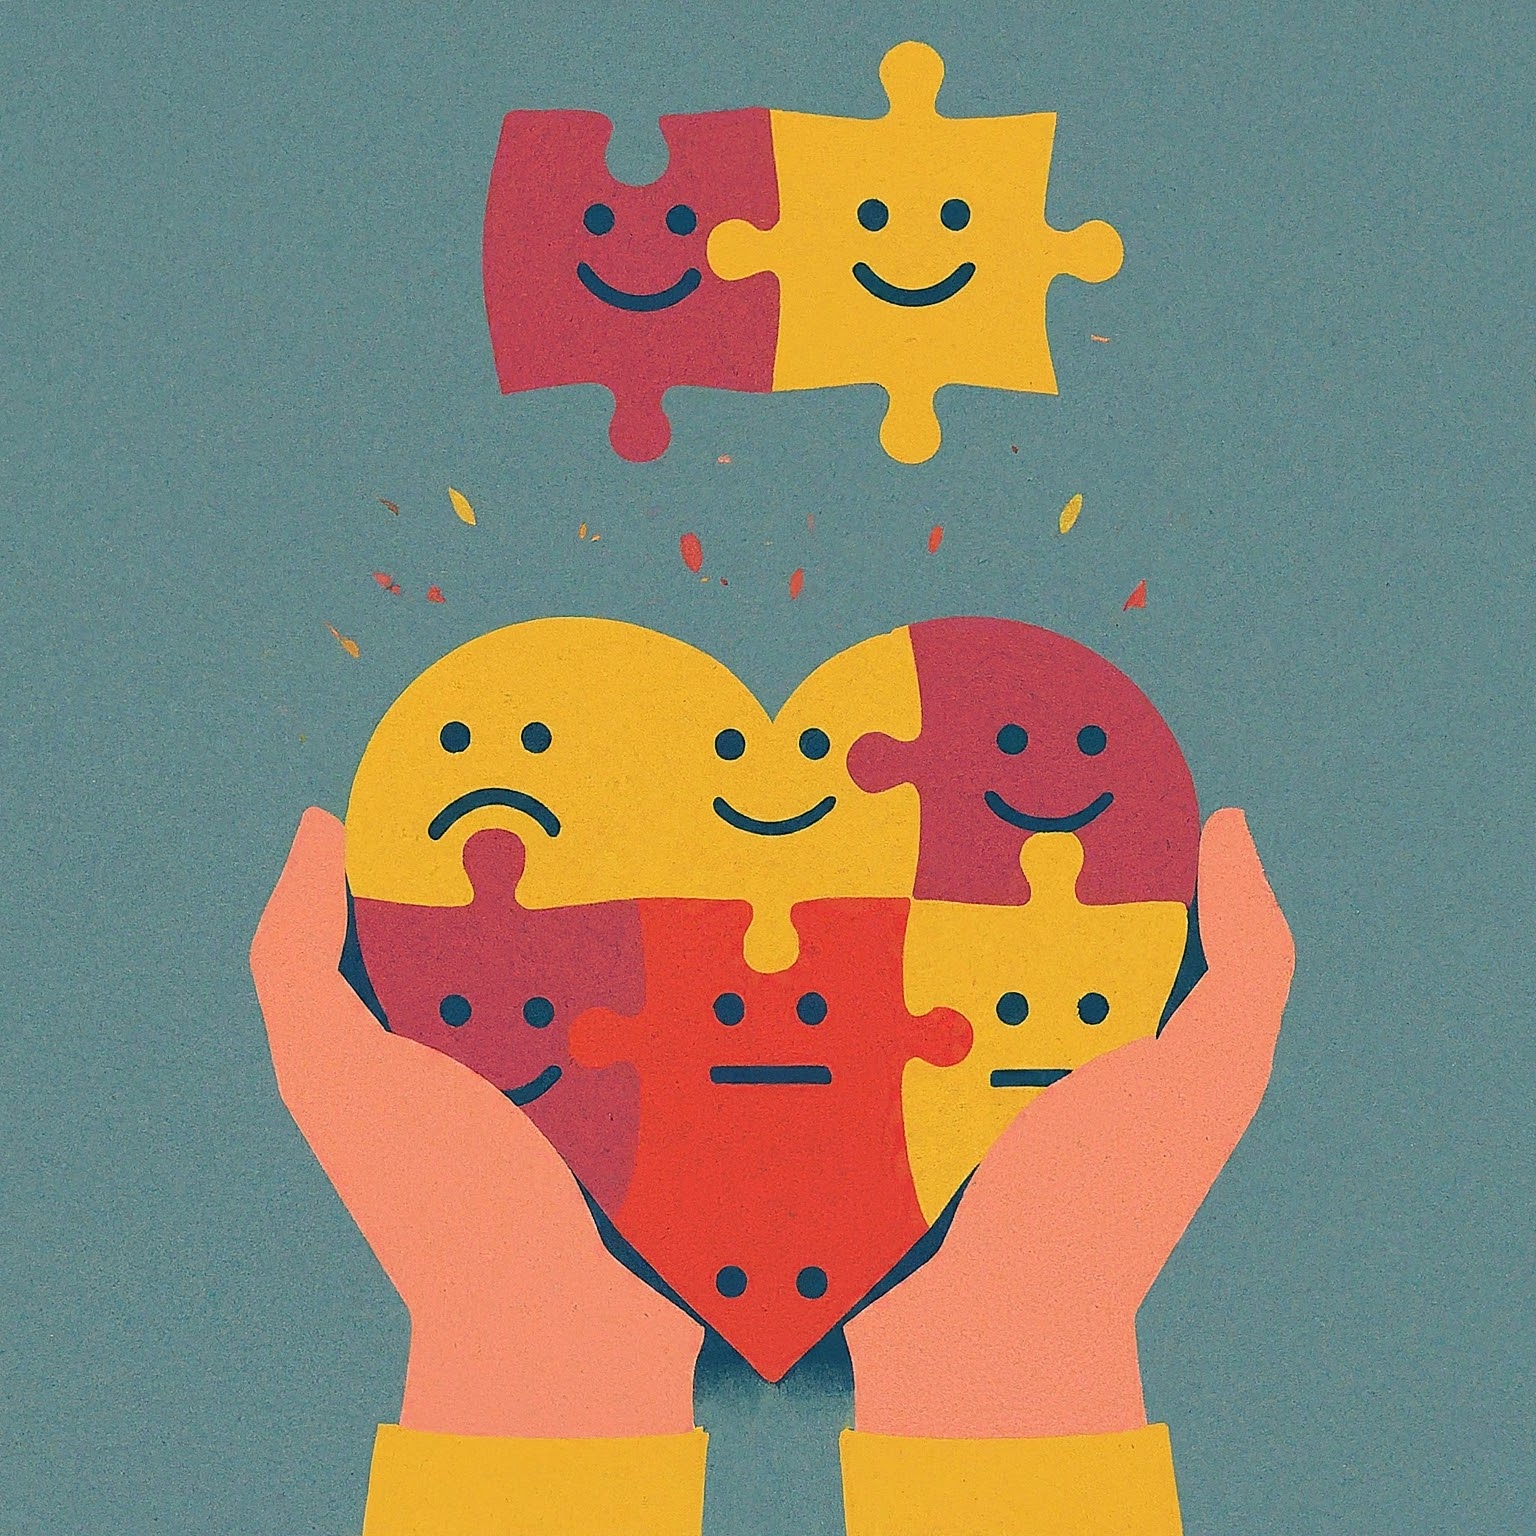 A colorful illustration of a child holding a heart-shaped puzzle with other emotions like happy, sad, and angry depicted on the puzzle pieces.